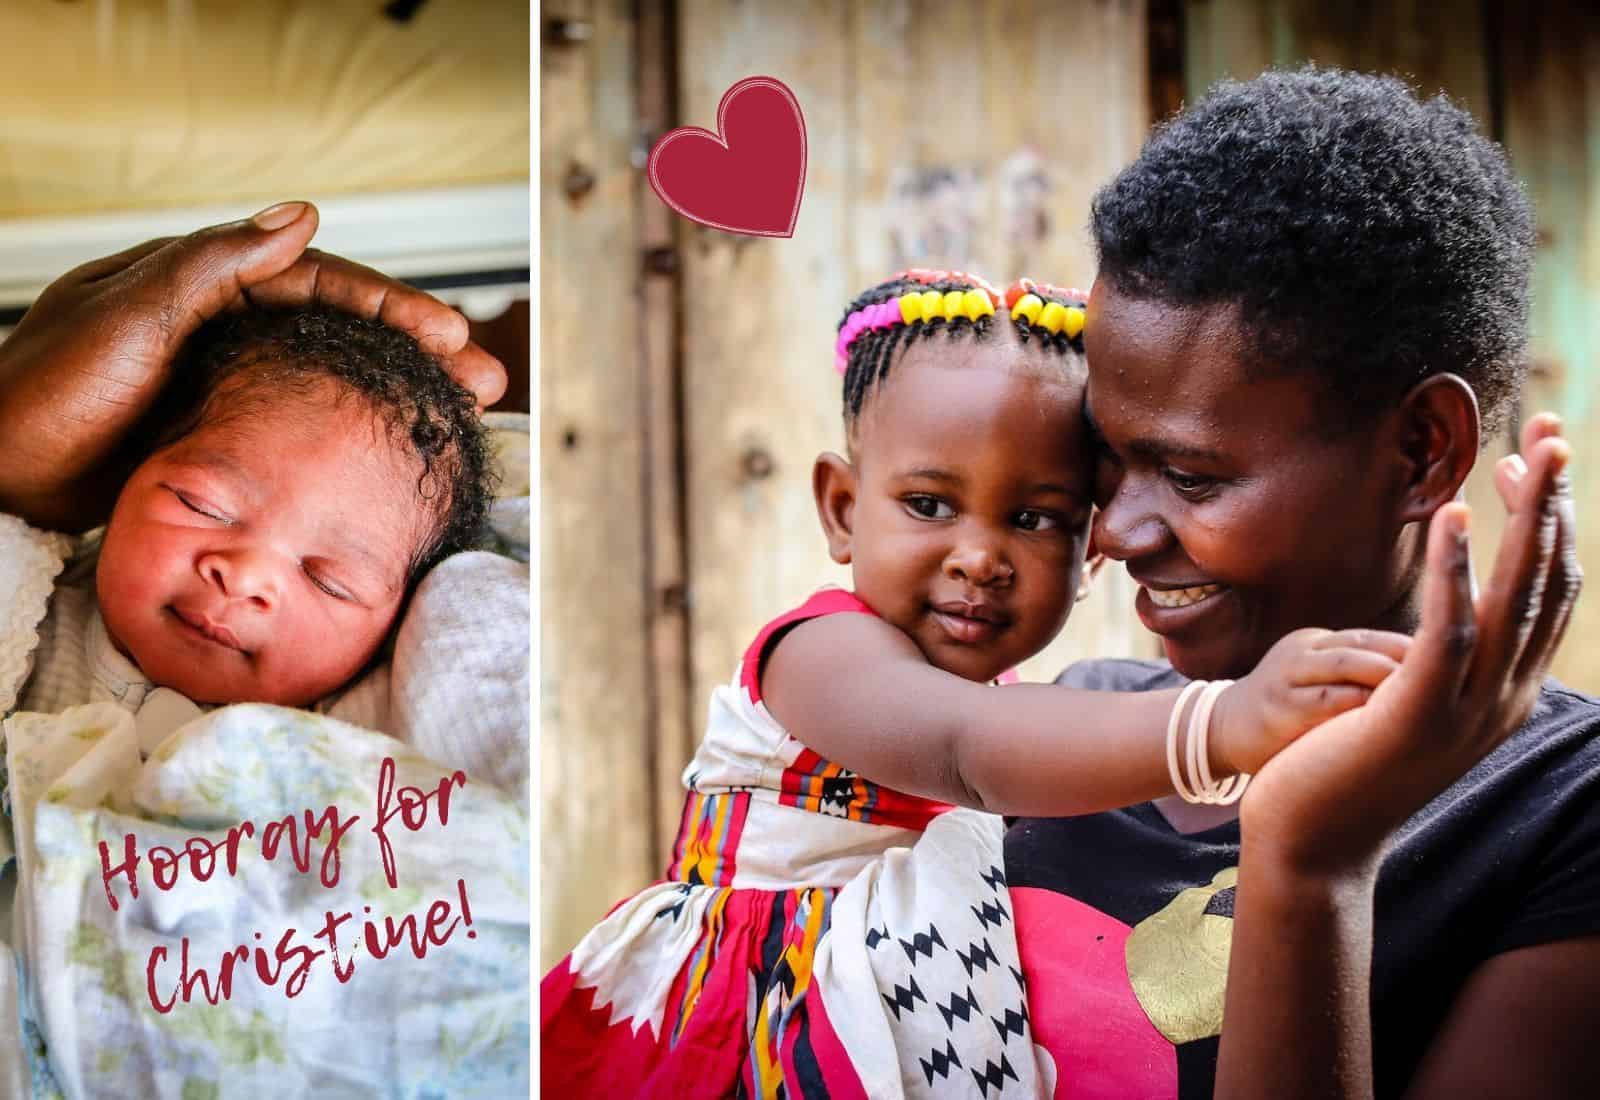 Two photo, one on the left of a newborn baby. Text reads: Hooray for Christine! On the right is a woman in a black shirt holding a girl in a red and white dress, smiling at her, celebrating her birthday milestone. 